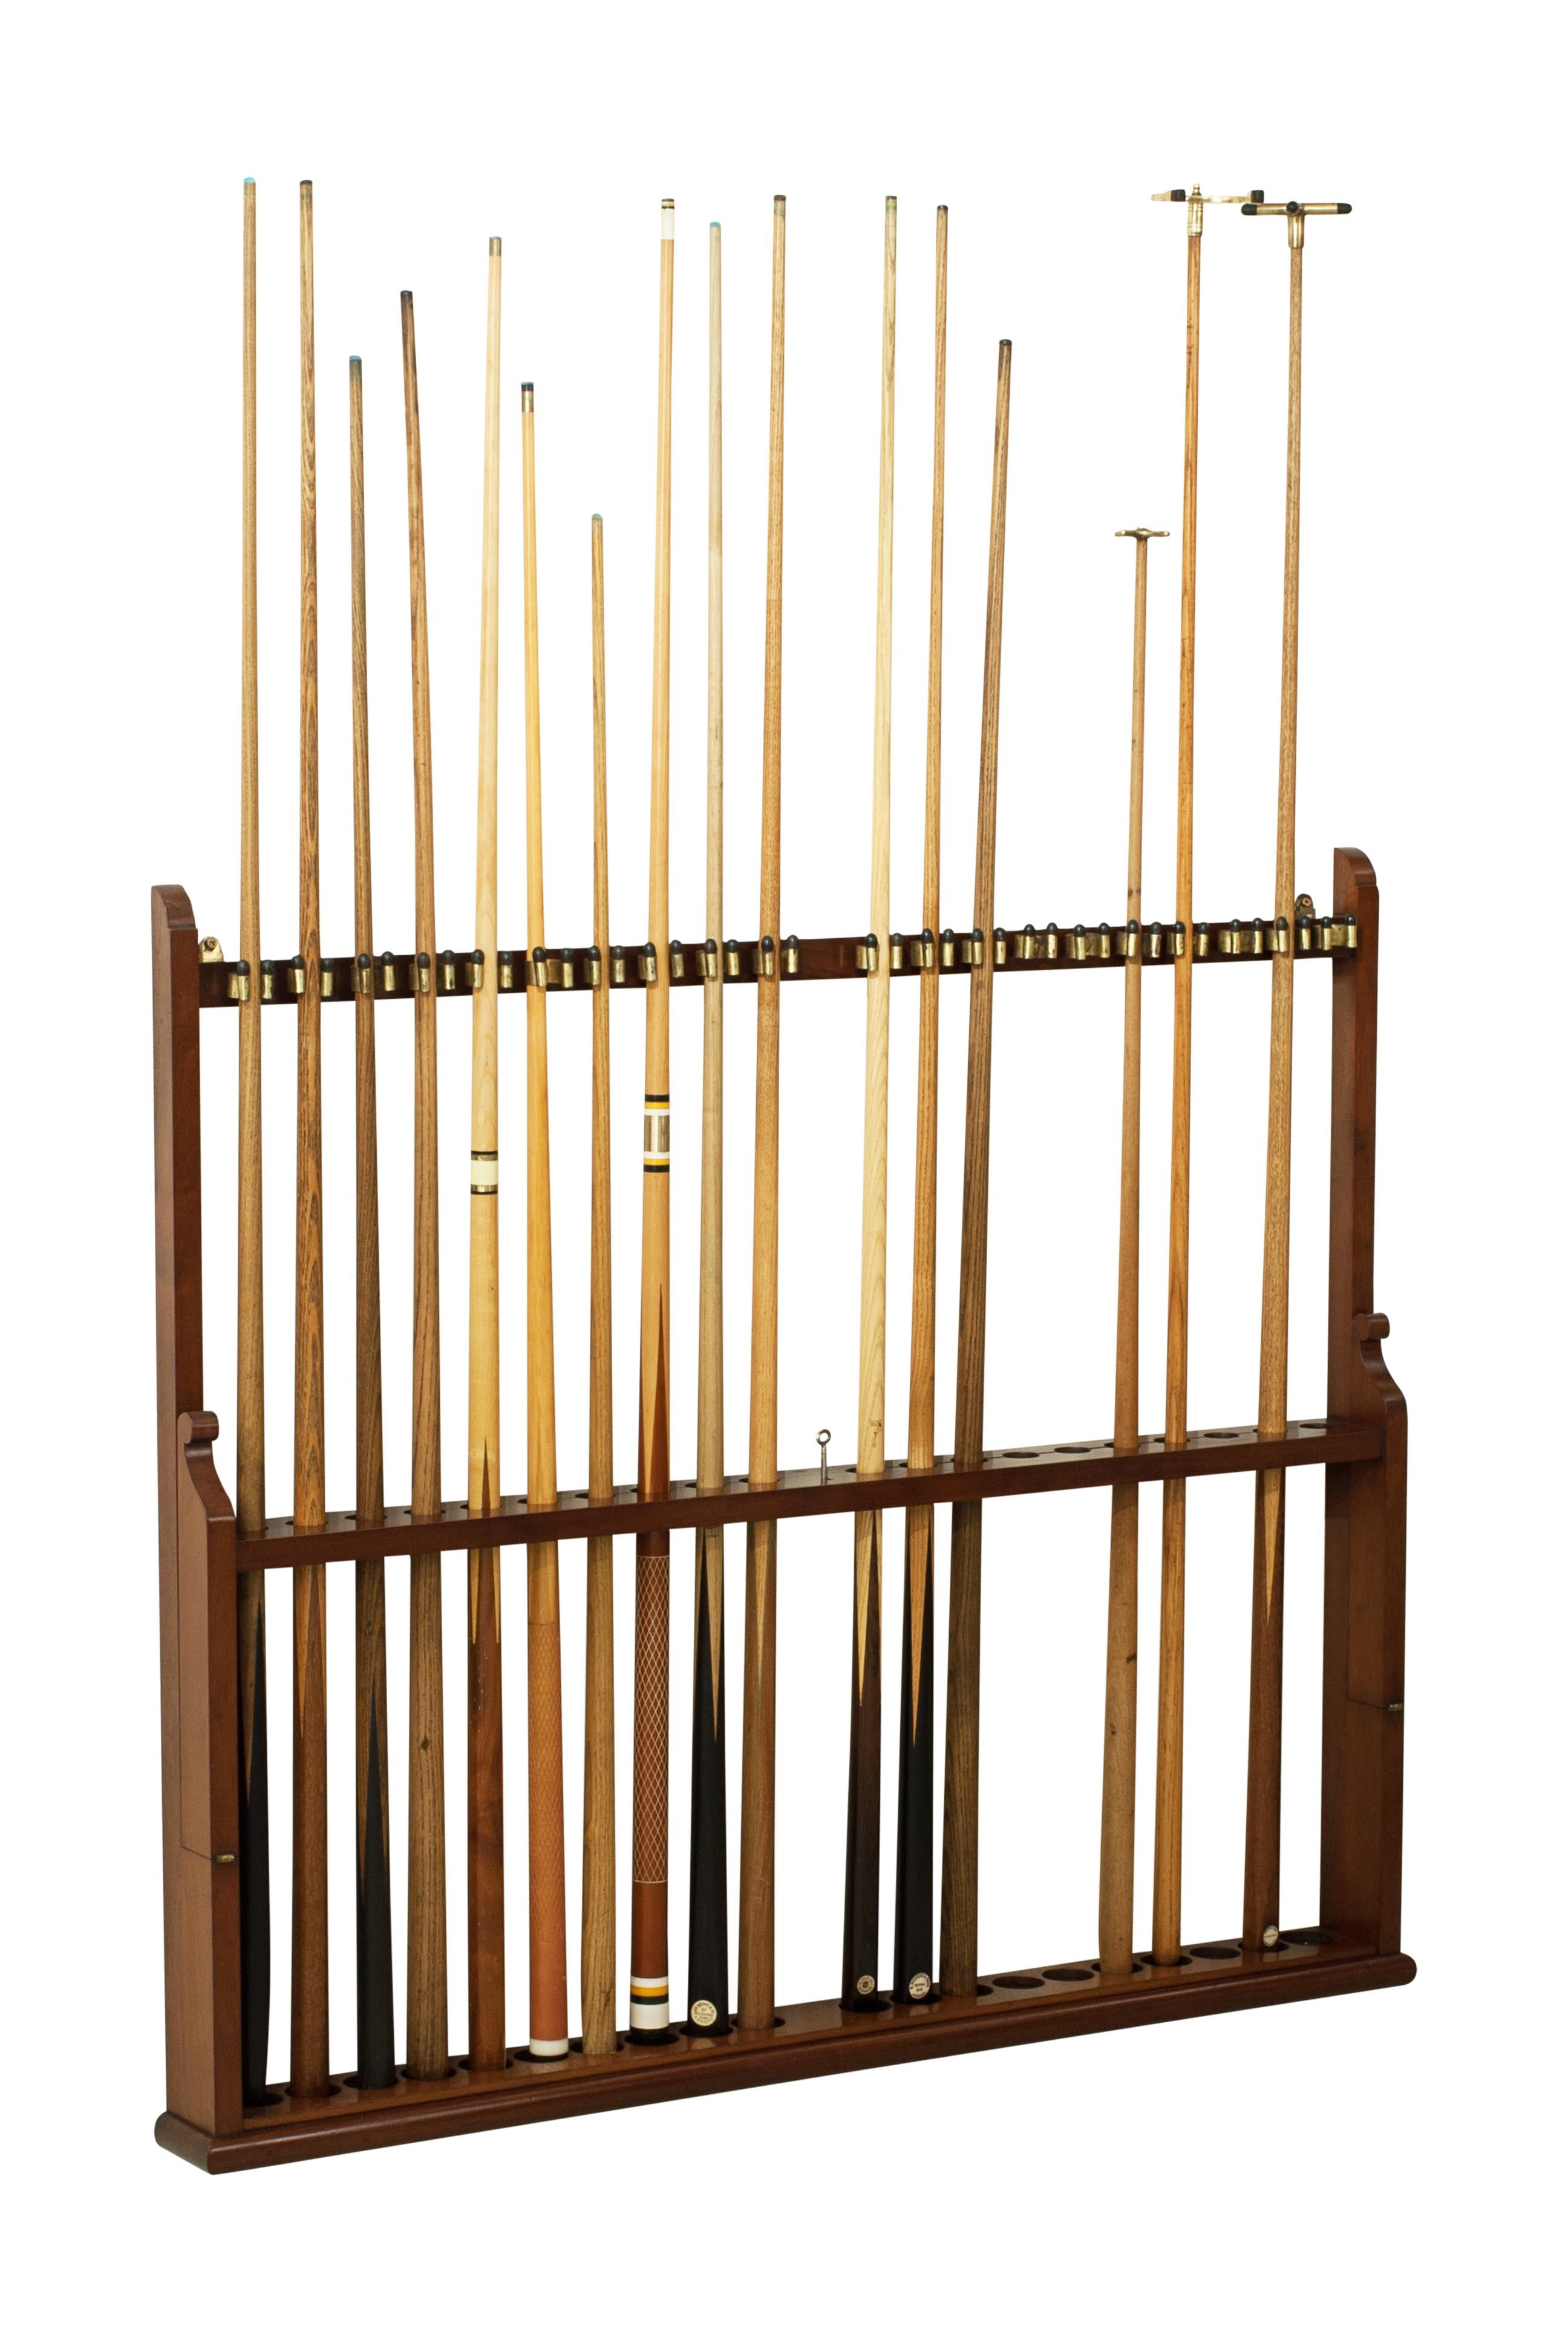 Wall-mounted cue rack.
A large wall-mounted lockable antique billiards, snooker, or pool cue rack constructed from mahogany. The rack will hold twenty cues and rest and clip in the brass clips at the top. There is then a hinged bar that lifts in